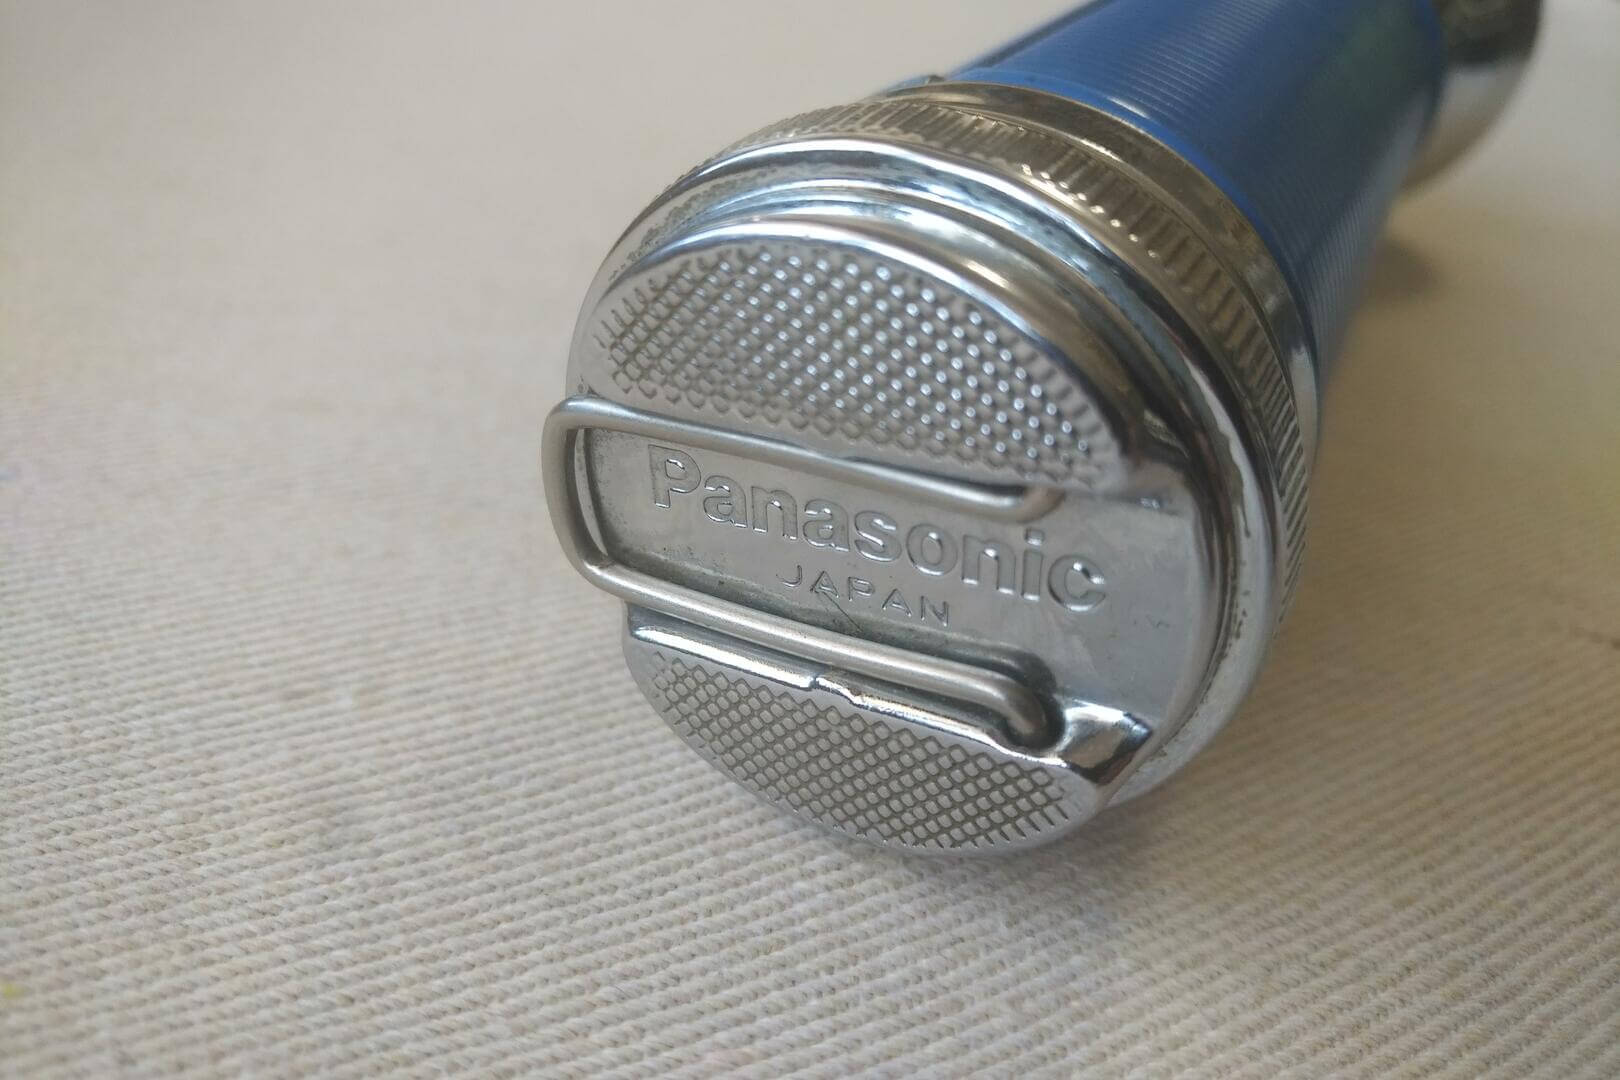 Vintage Panasonic emergency flashlight in chrome and blue. 1970s retro made in Japan collectible lightning and household tools